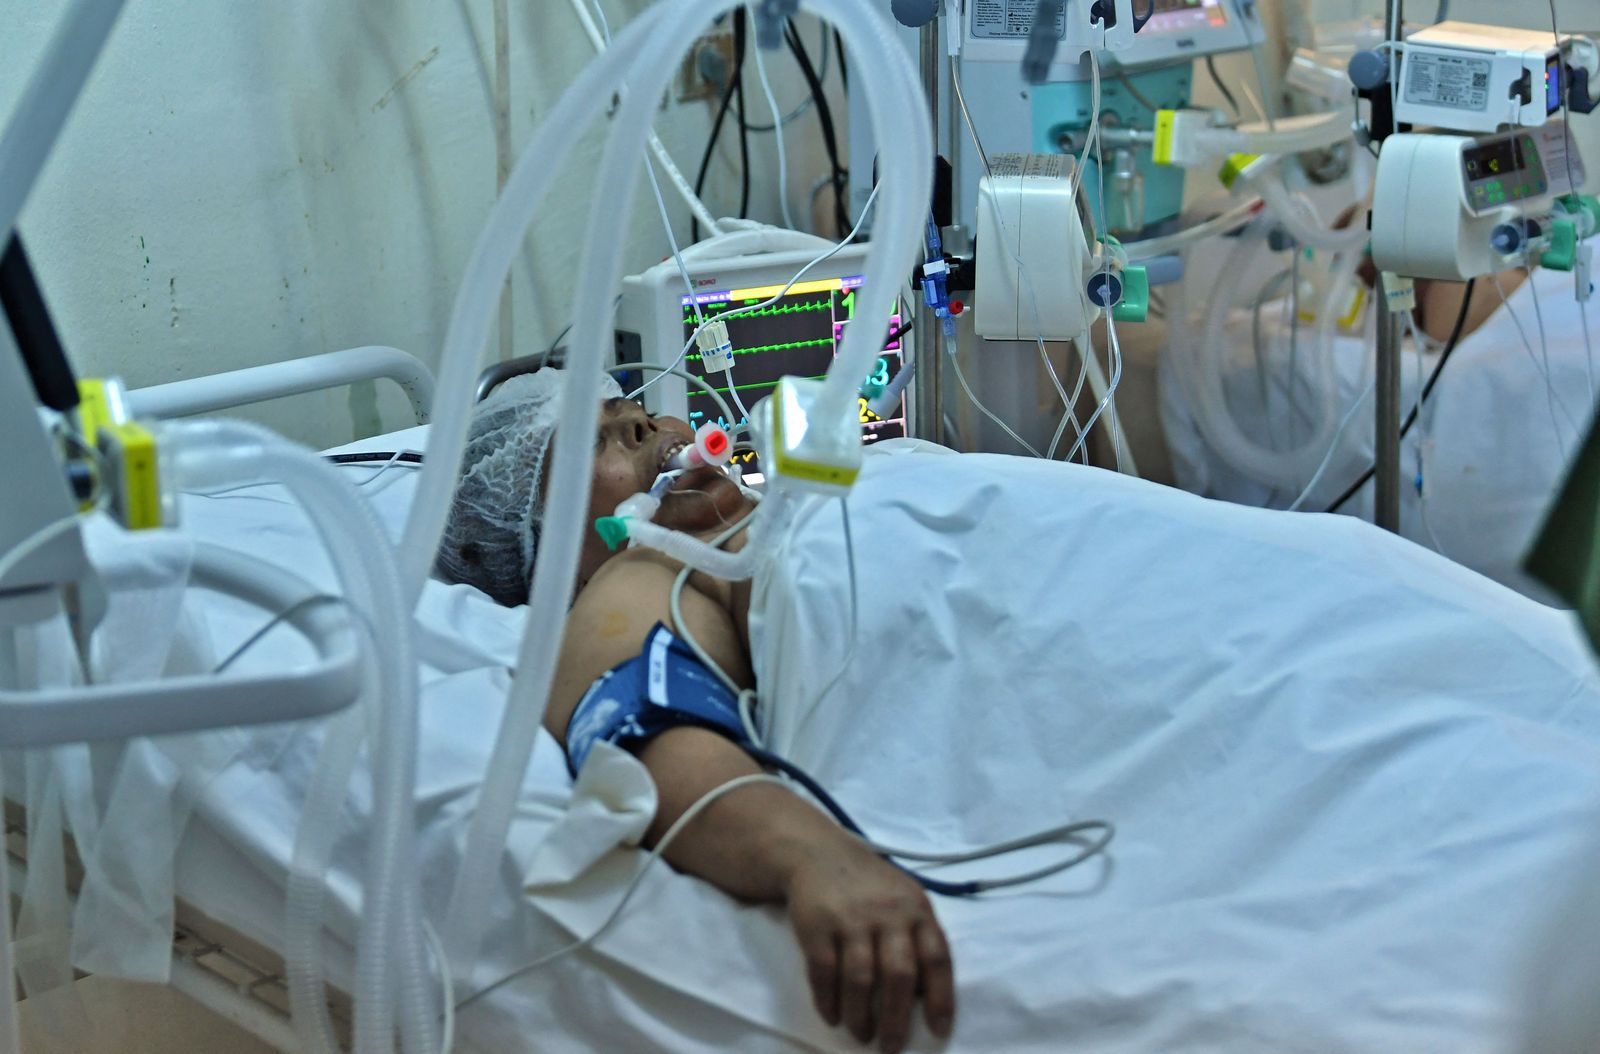 A Tunisian patient infected with COVID-19 is pictured at the intensive care unit of the Aghlabide hospital in the east-central city of Kairouan on July 4, 2021. - Tunisia placed the capital Tunis and the northern town of Bizerte under a partial lockdown from until July 14 in a bid to rein in record daily coronavirus cases and deaths. (Photo by FETHI BELAID / AFP) - AFP